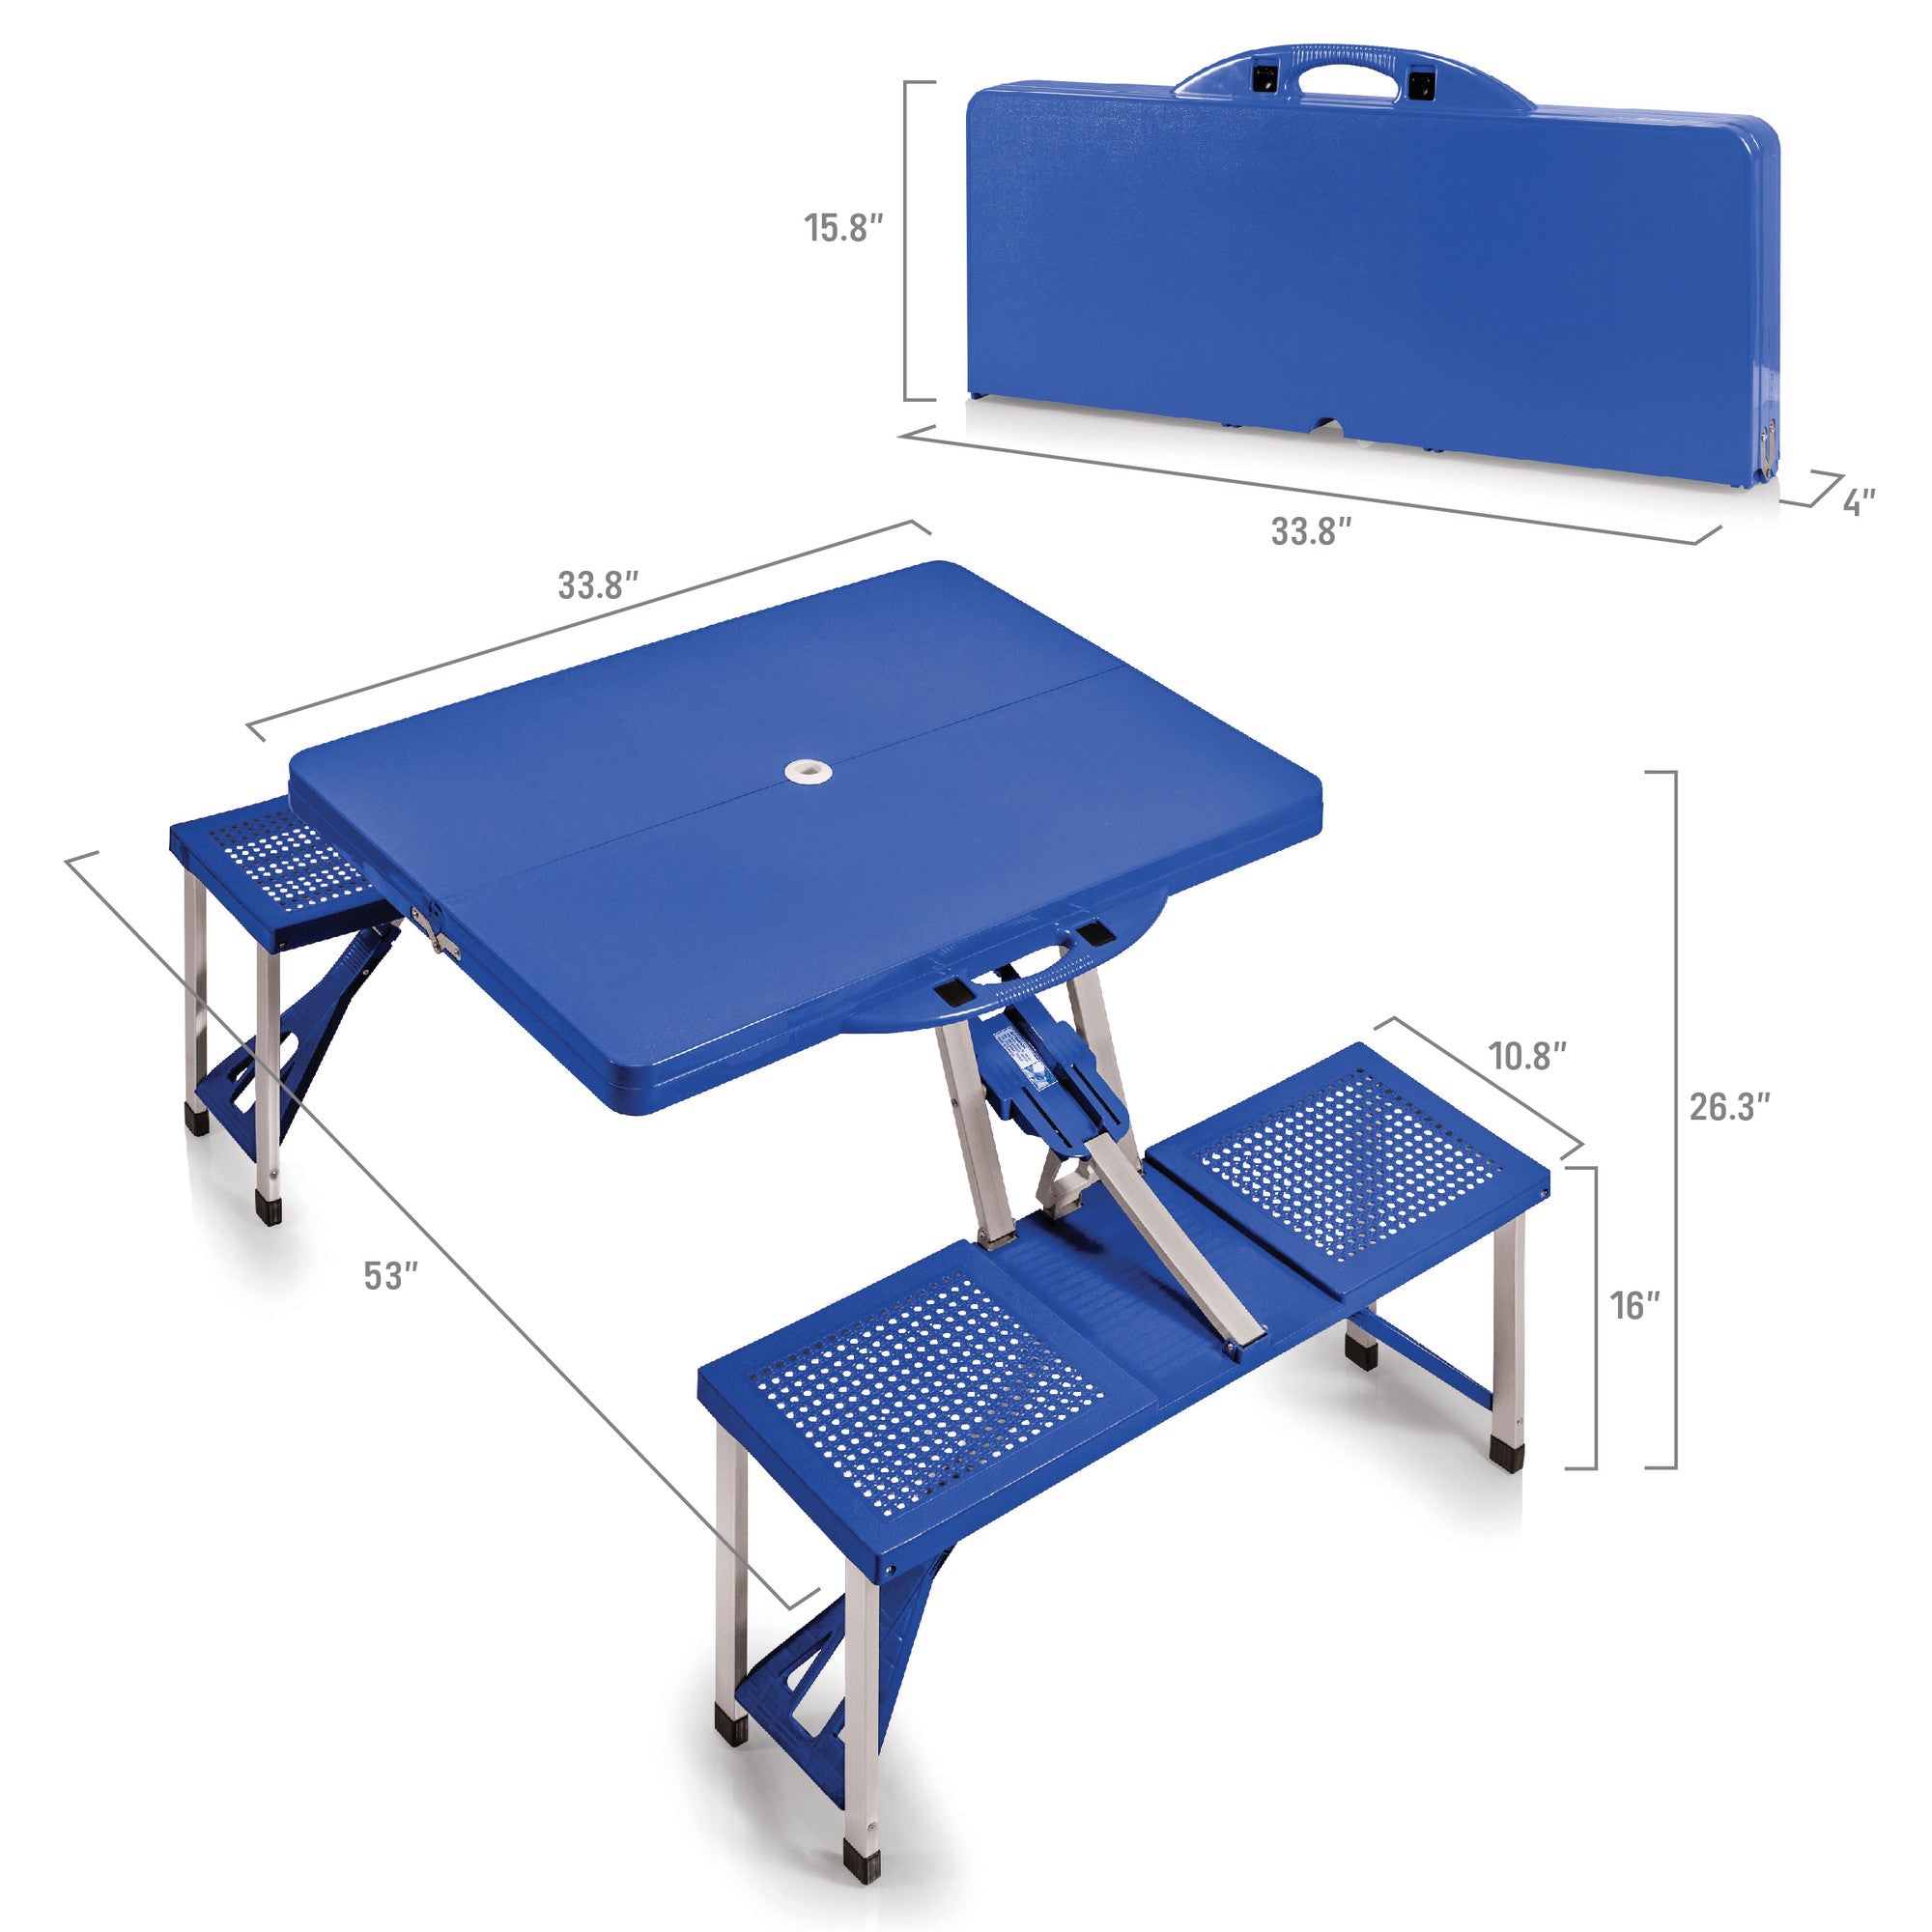 Vancouver Canucks - Picnic Table Portable Folding Table with Seats